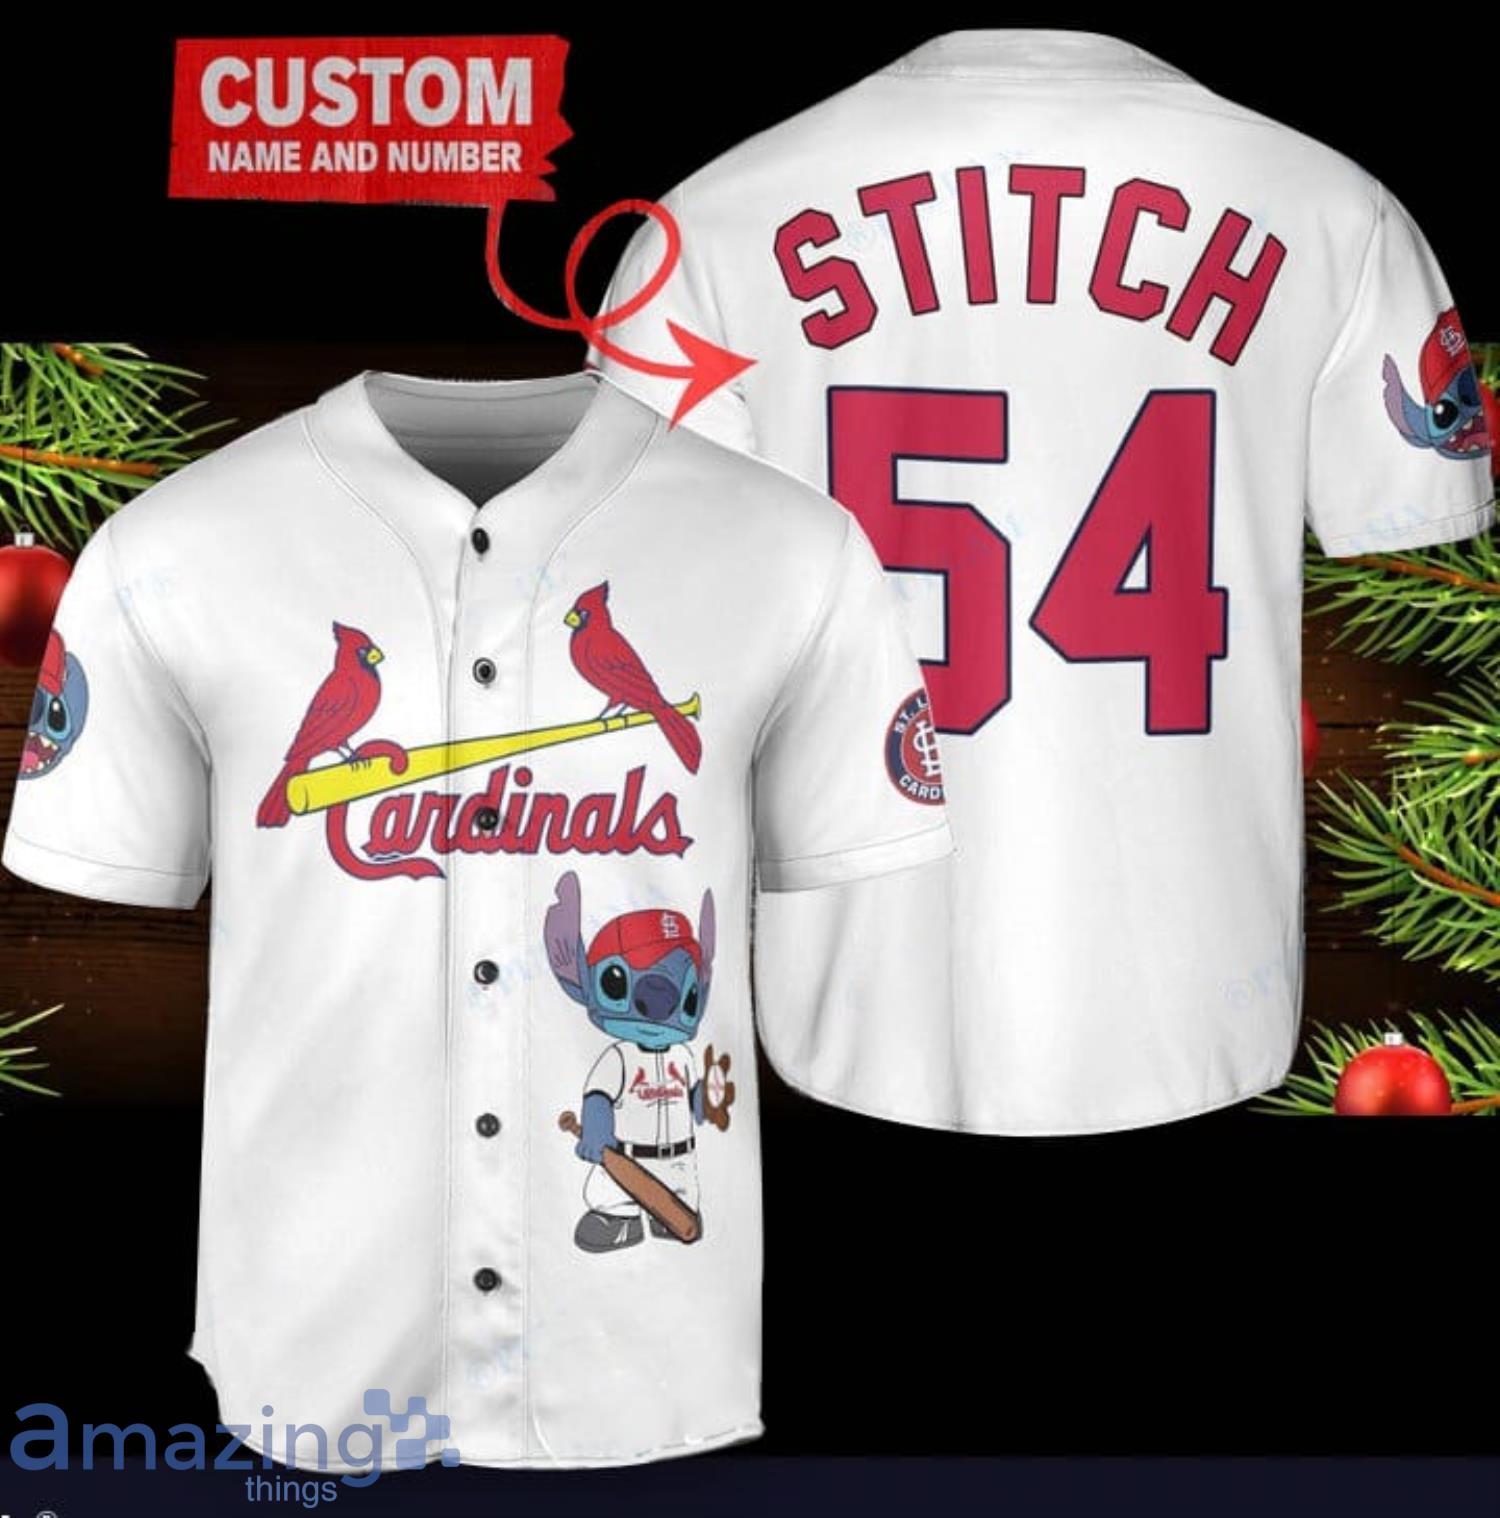 St Louis Cardinals Personalized Jerseys Customized Shirts with Any